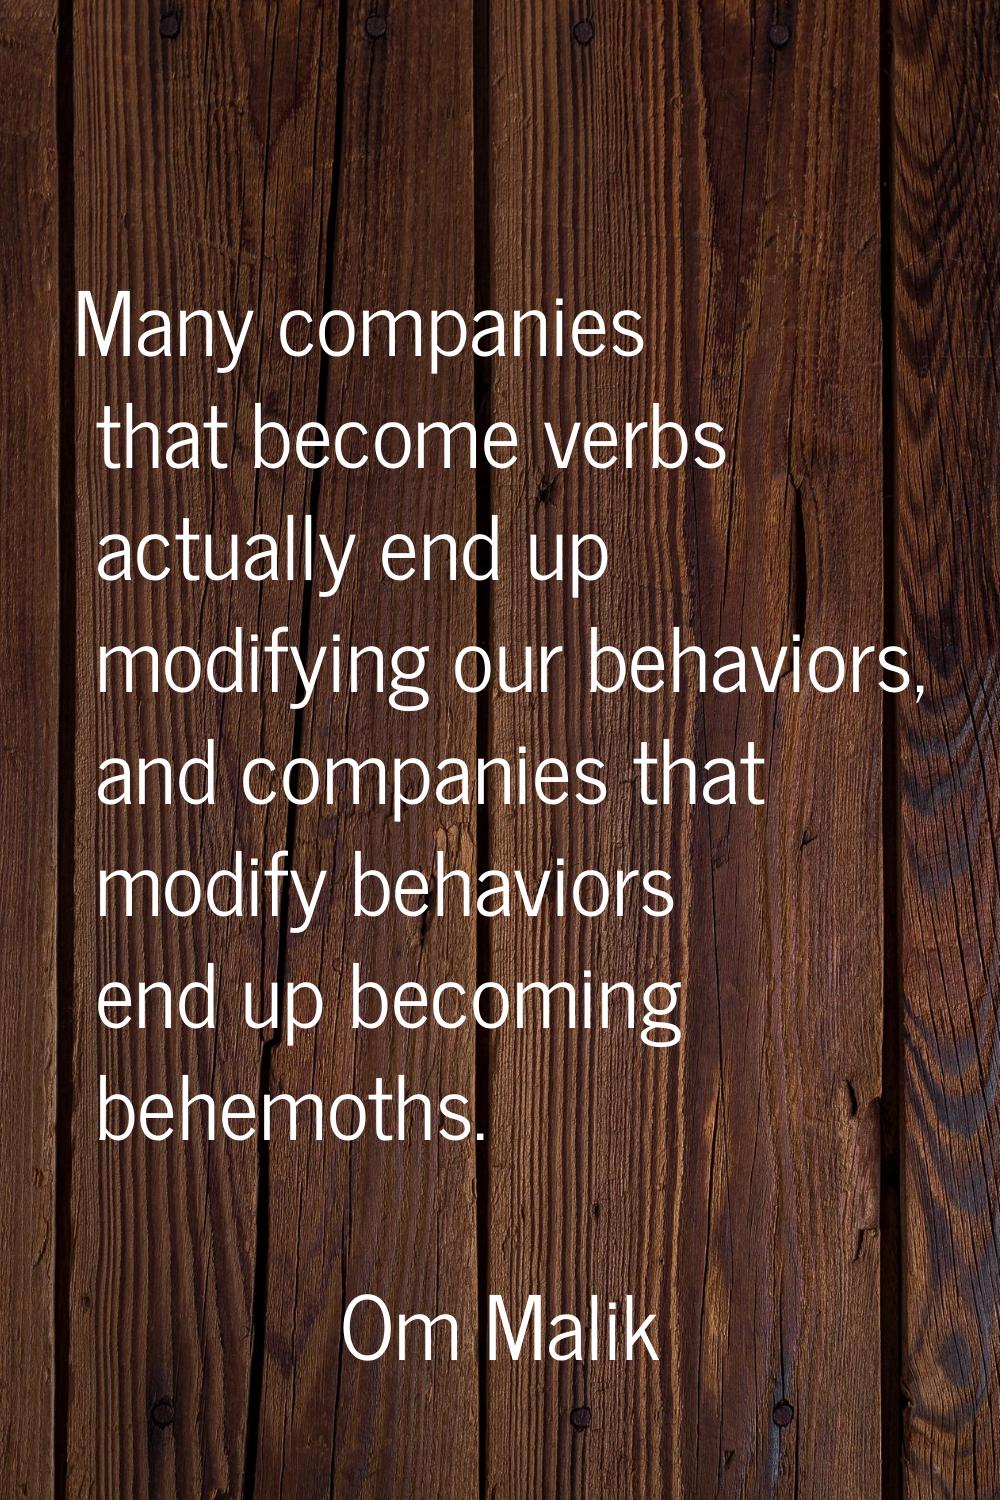 Many companies that become verbs actually end up modifying our behaviors, and companies that modify